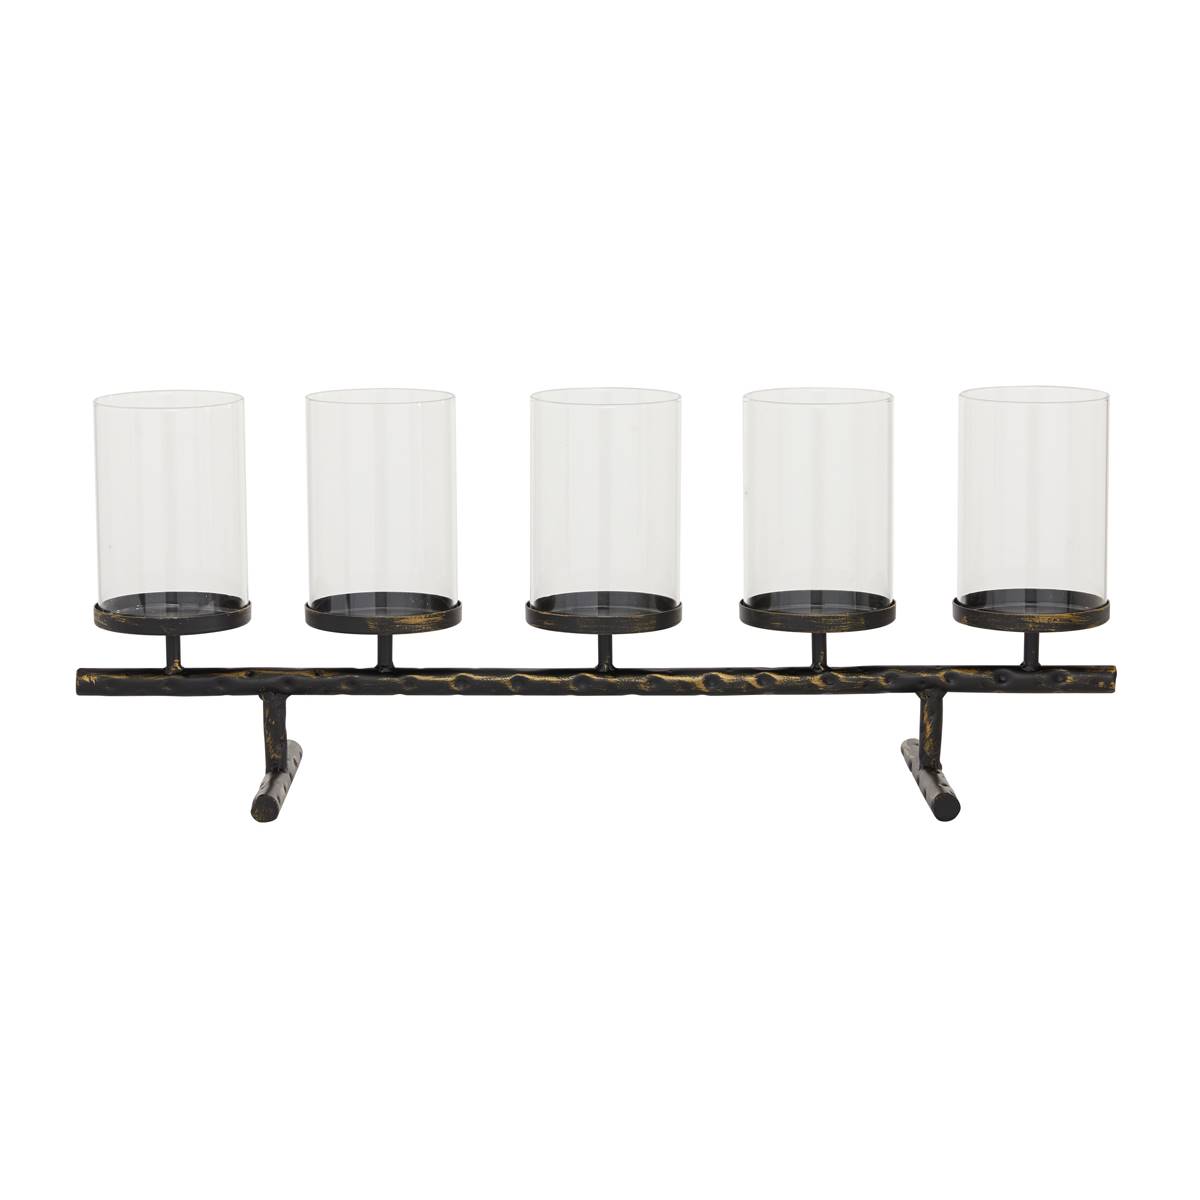 9th & Pike(R) Metal And Glass Contemporary Candlestick Holders